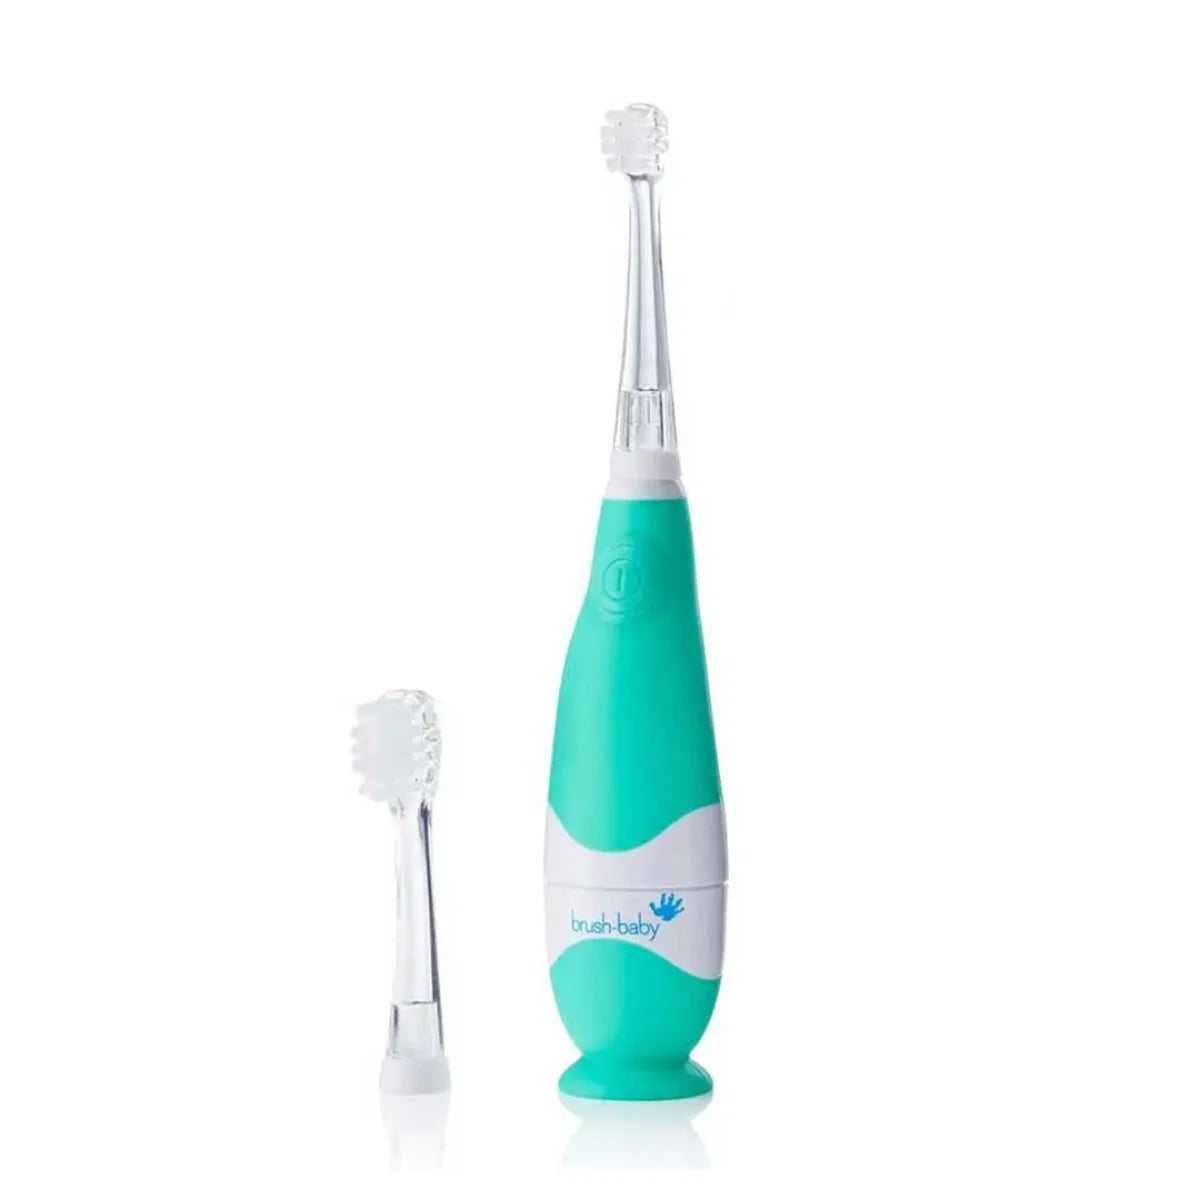 brush baby baby sonic electric toothbrush for new baby and toddler teeth